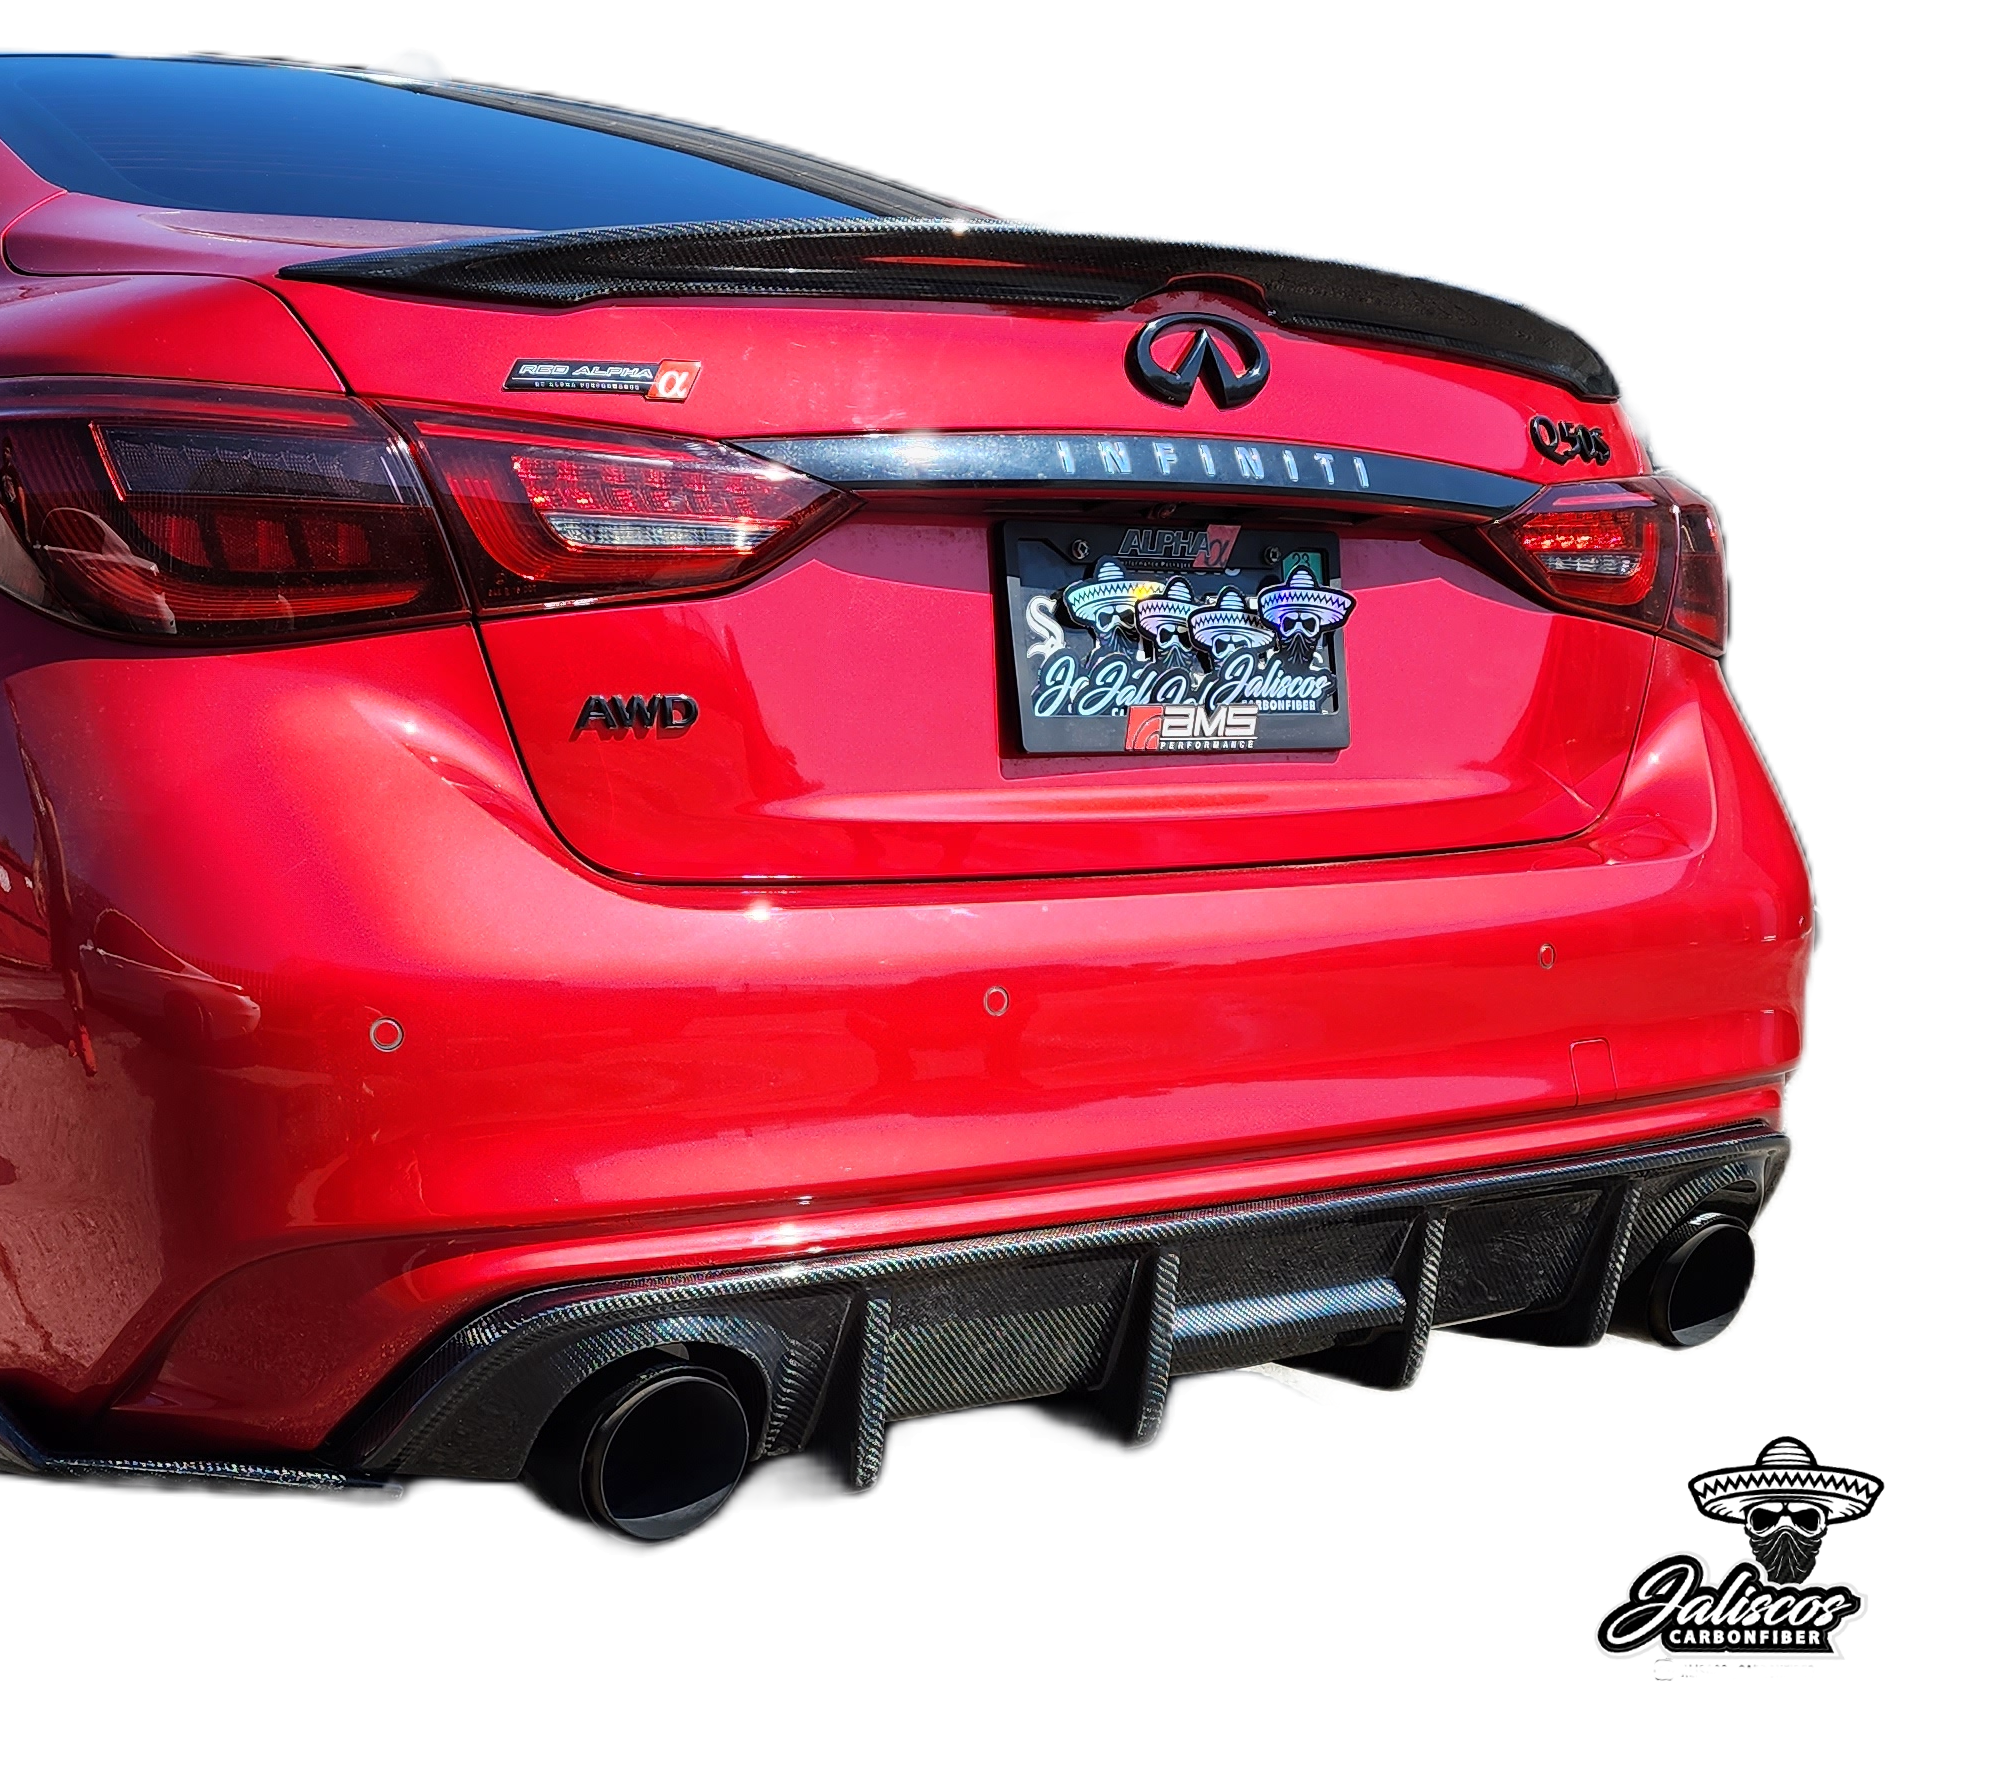 Jalisco's CF Carbon Fiber 'OG' Style Diffuser on a red Infiniti Q50 2018 model with a transparent background."